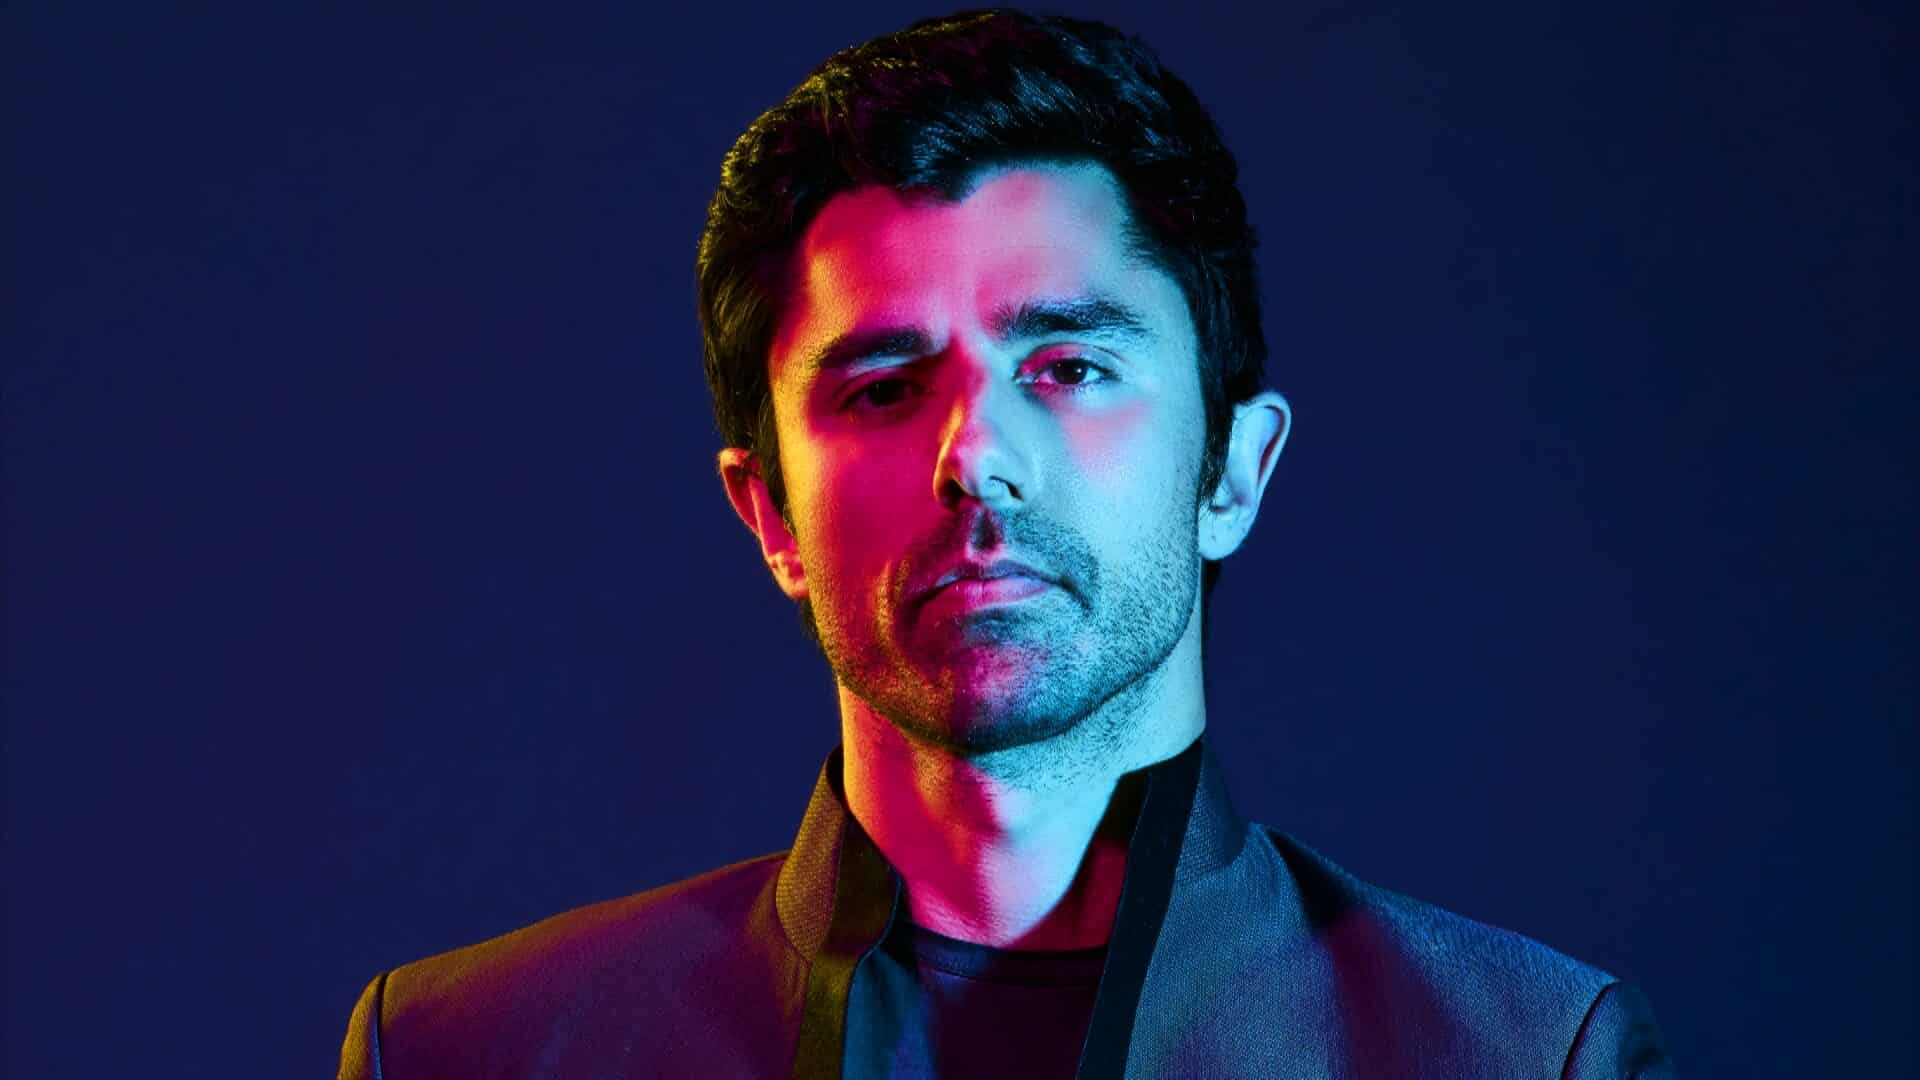 KSHMR & Maddix combine for powerful new single ‘Close To You’: Listen